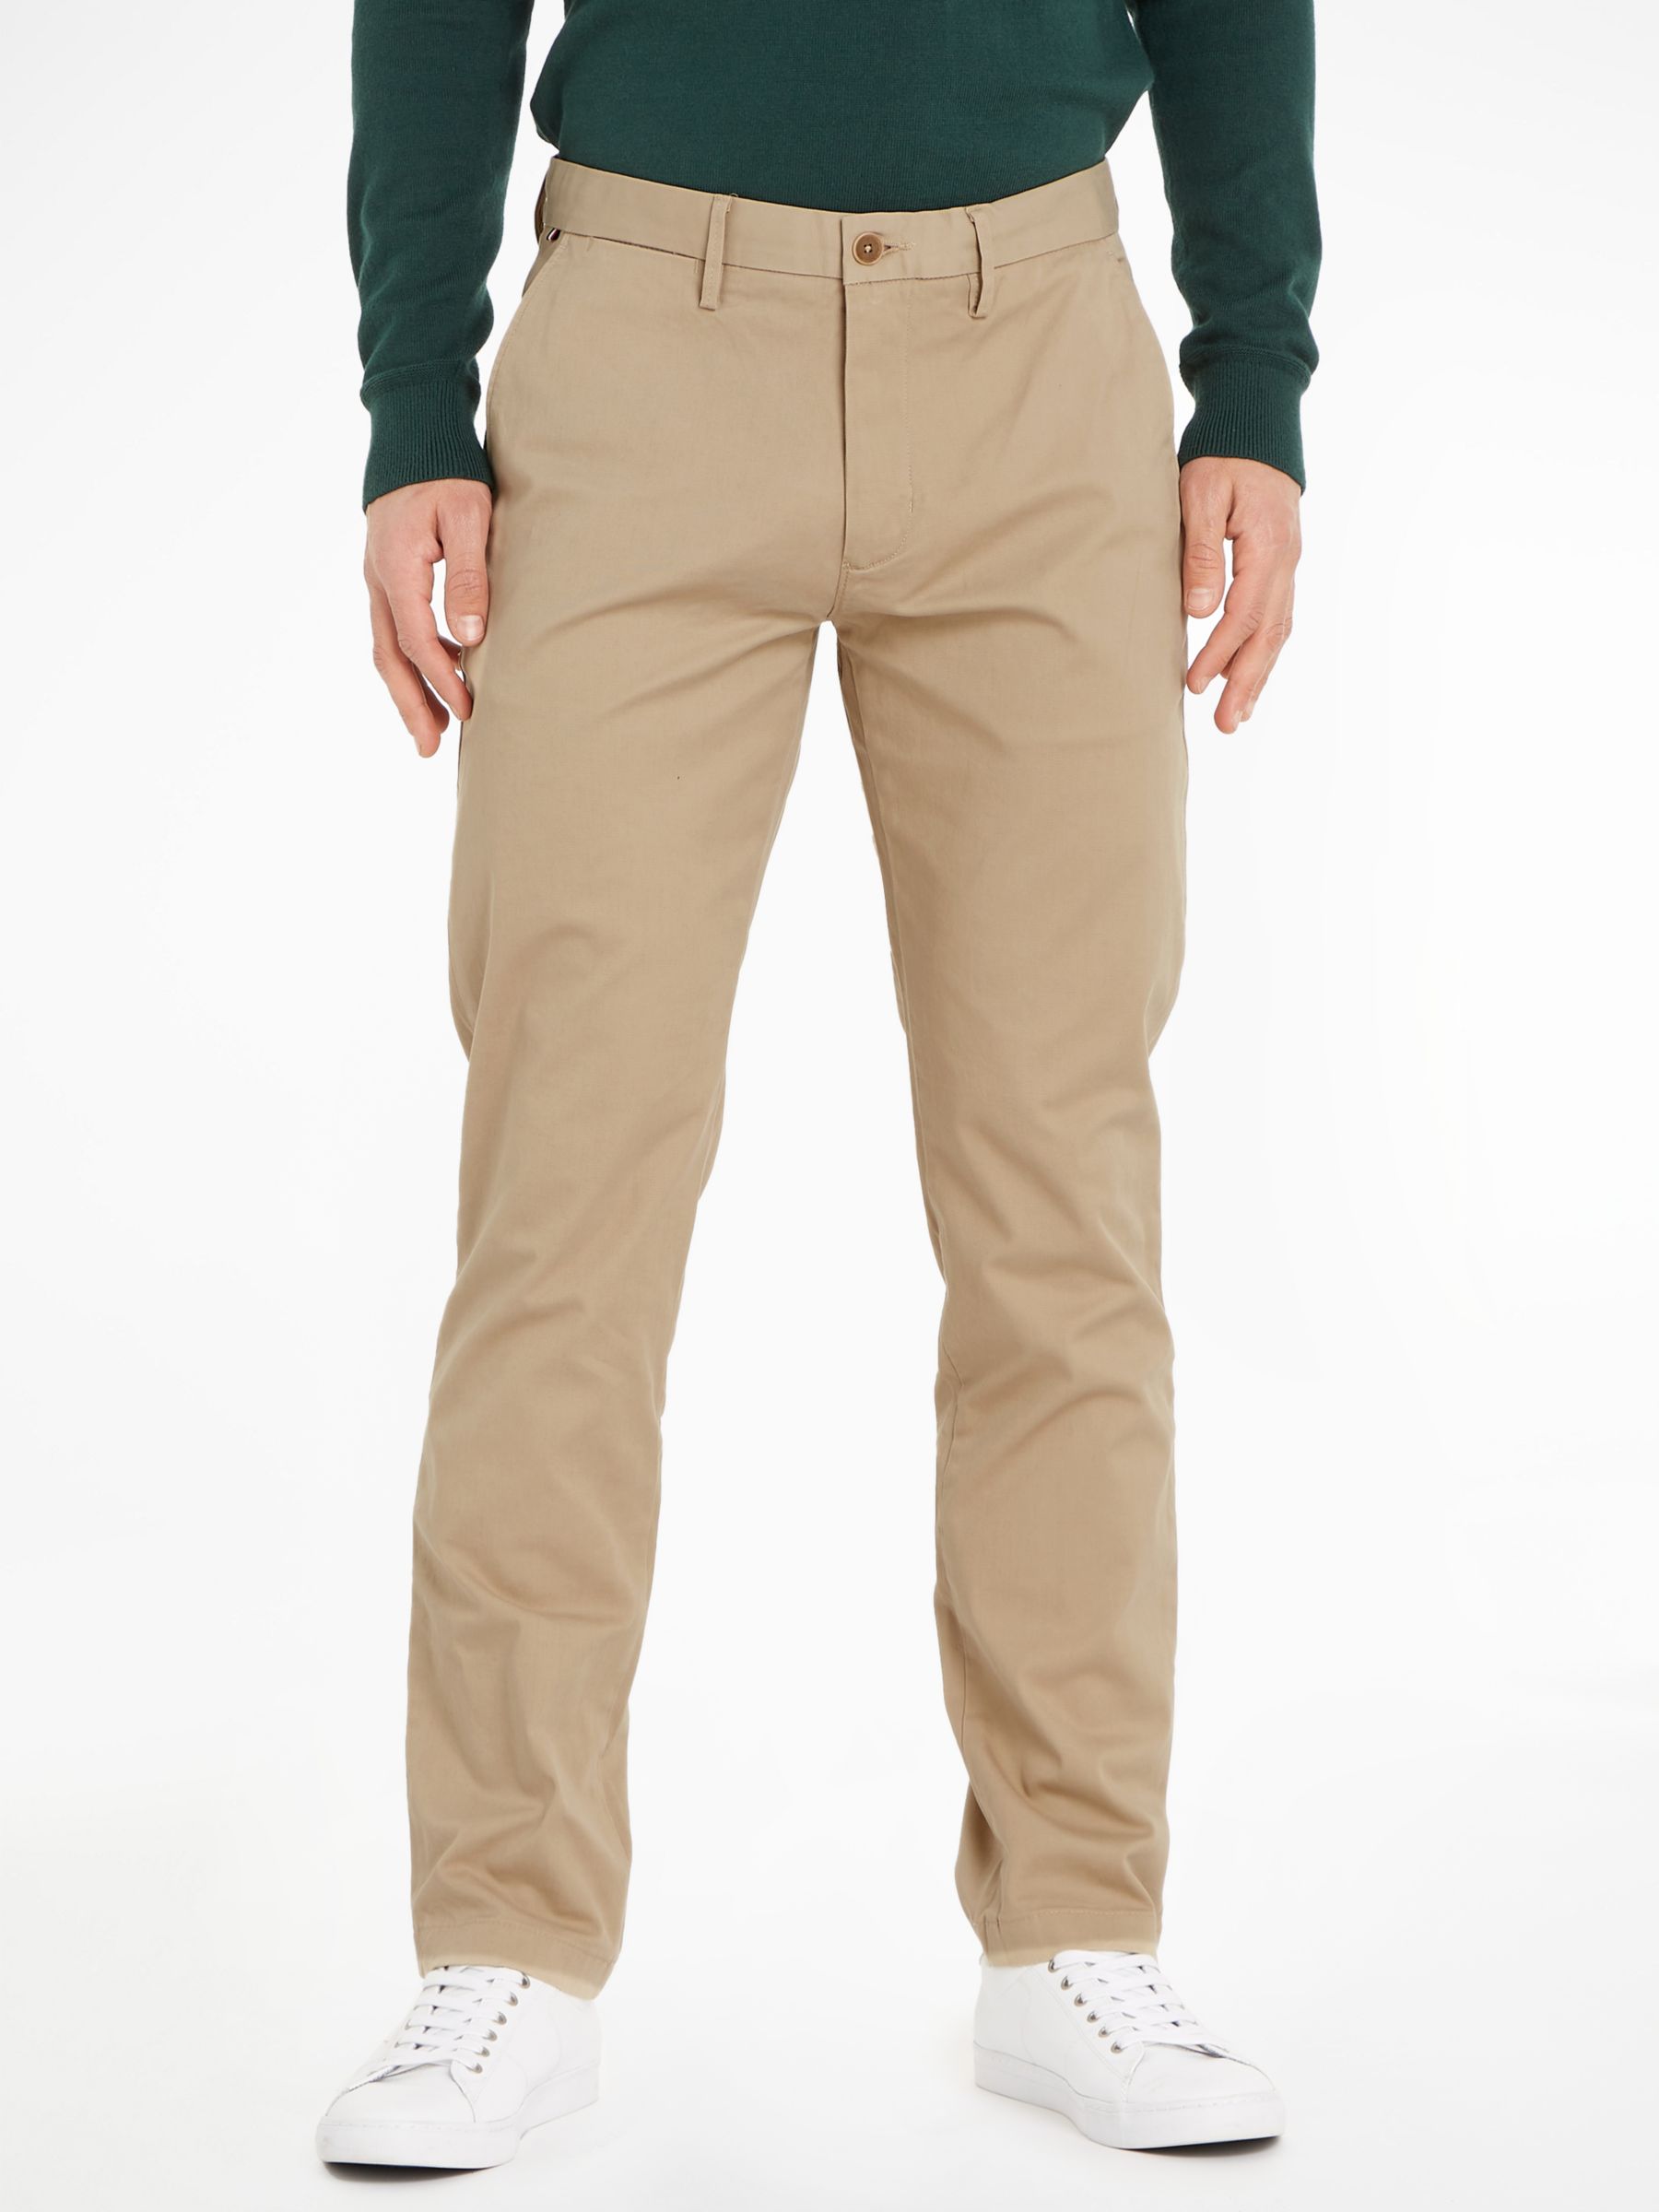 Hilfiger Straight Fit Bleecker Chinos, at John Lewis & Partners